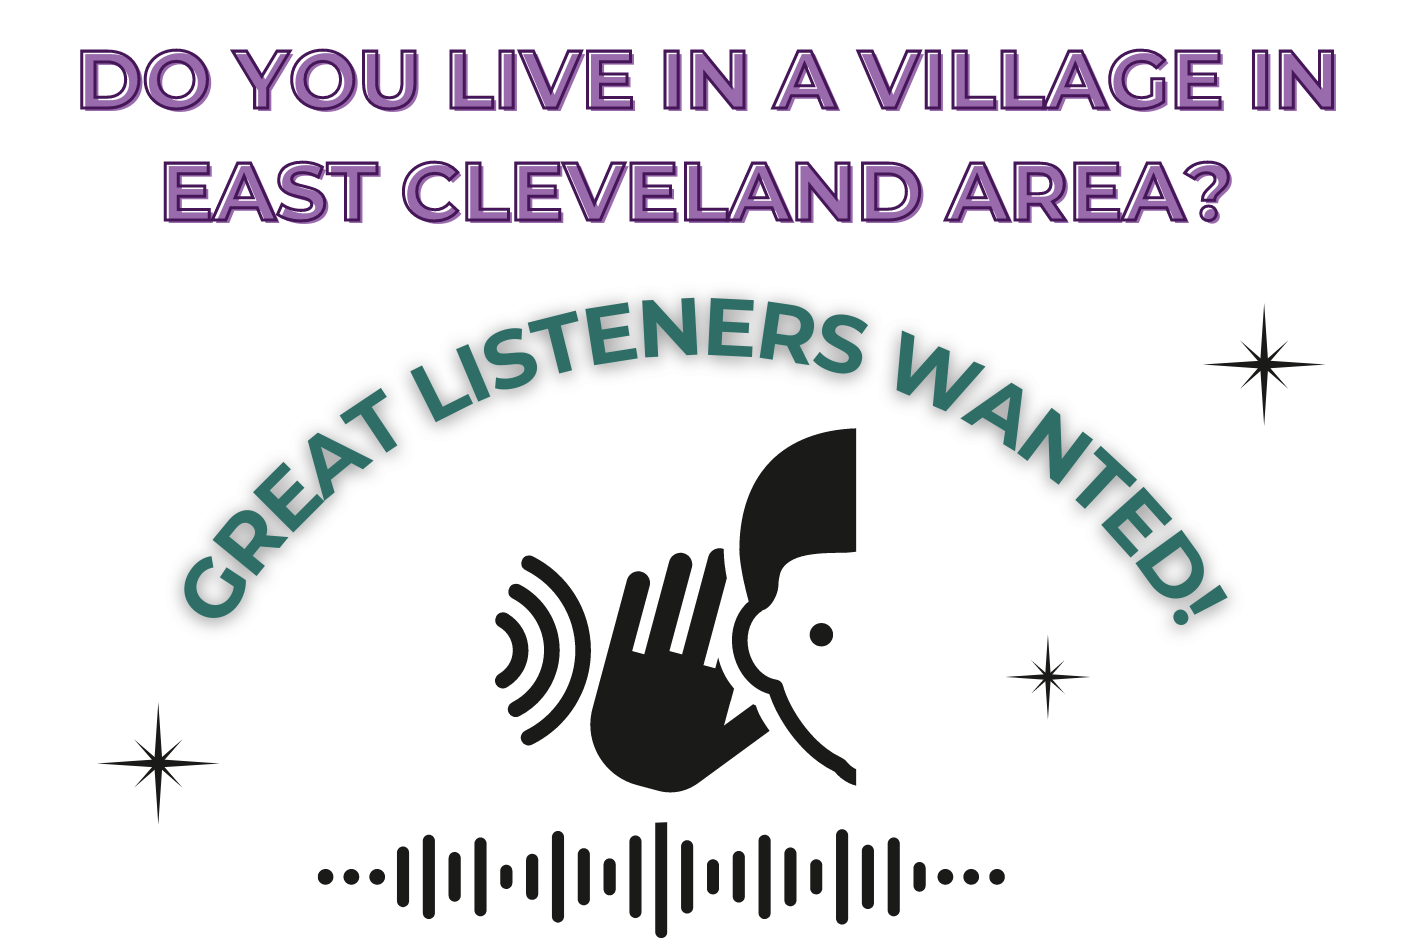 Great Listeners Recruitment for East Cleveland